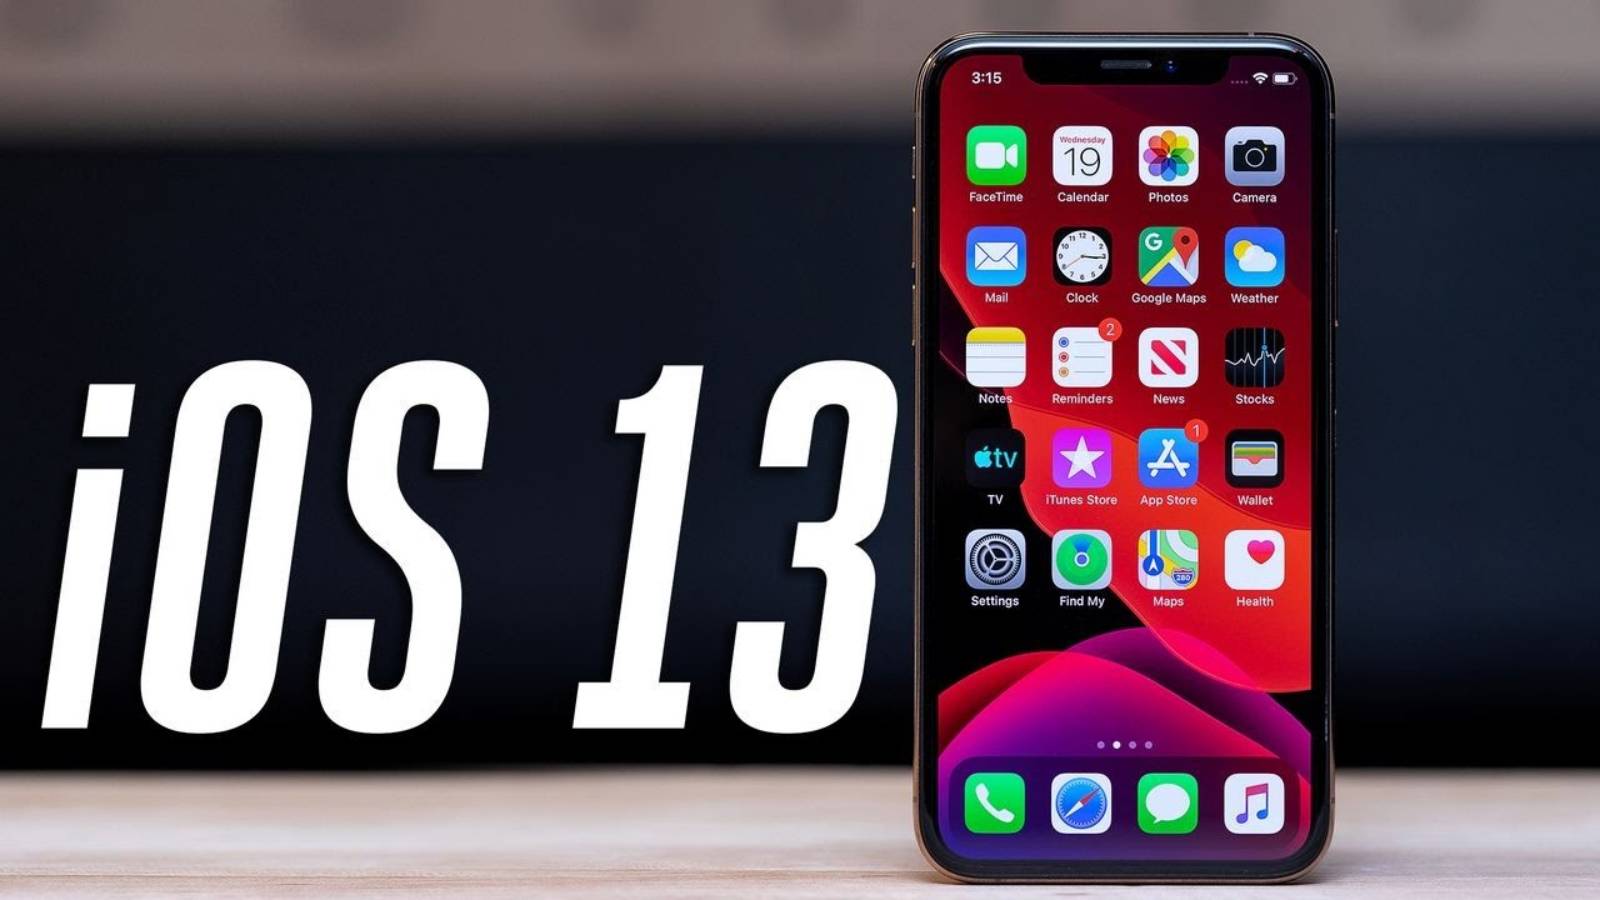 iOS 13.5 changes